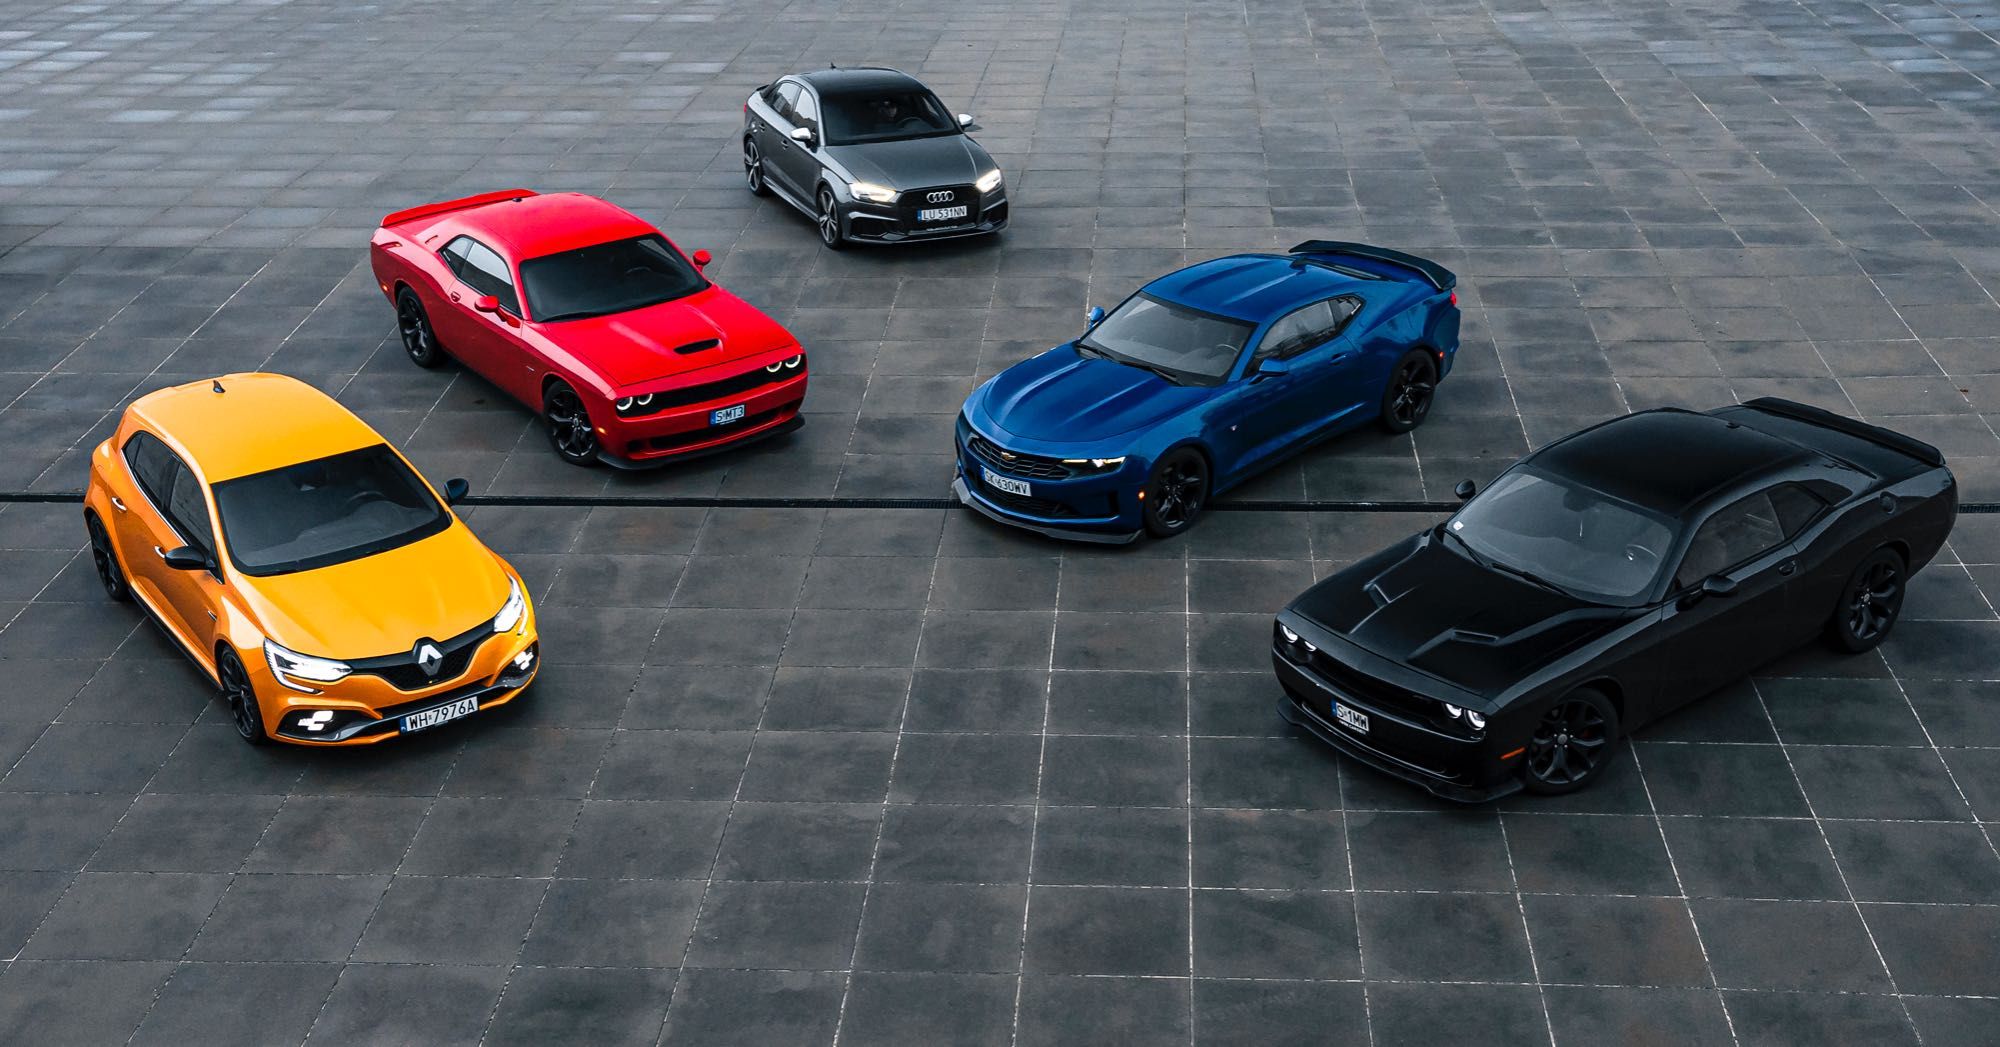 Wynajem Dodge Charger, Challenger, Mustang Cabrio, Audi RS3, Audi S3